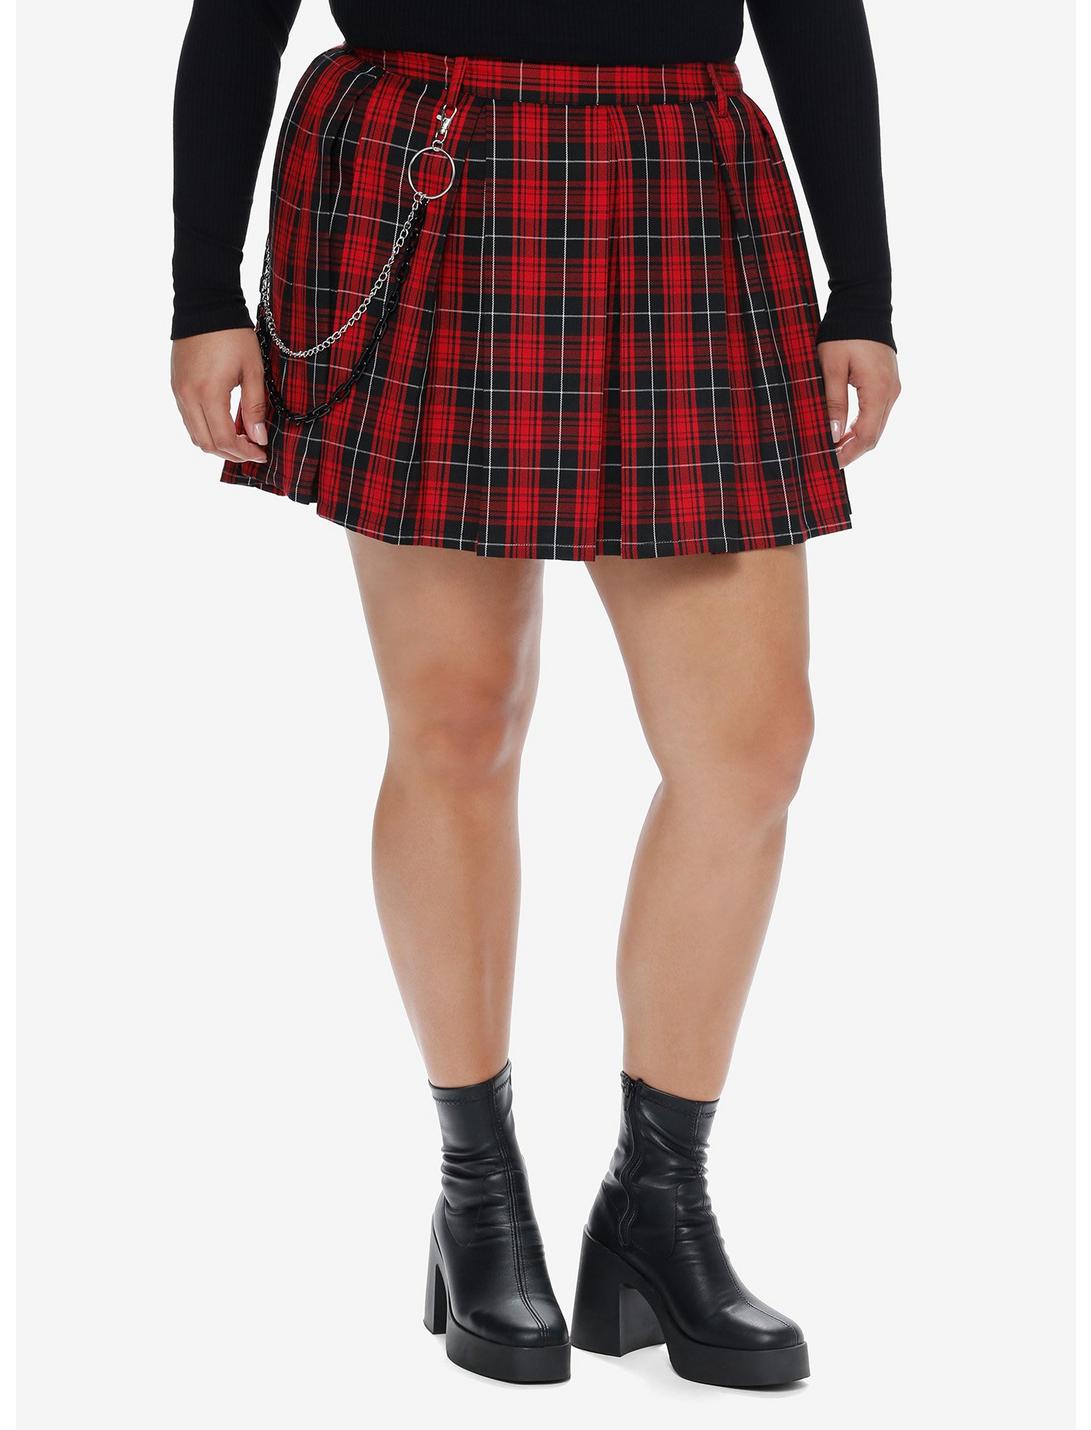 Social Collision Red Plaid Side Chain Pleated Skirt Plus Size, BLACK, hi-res